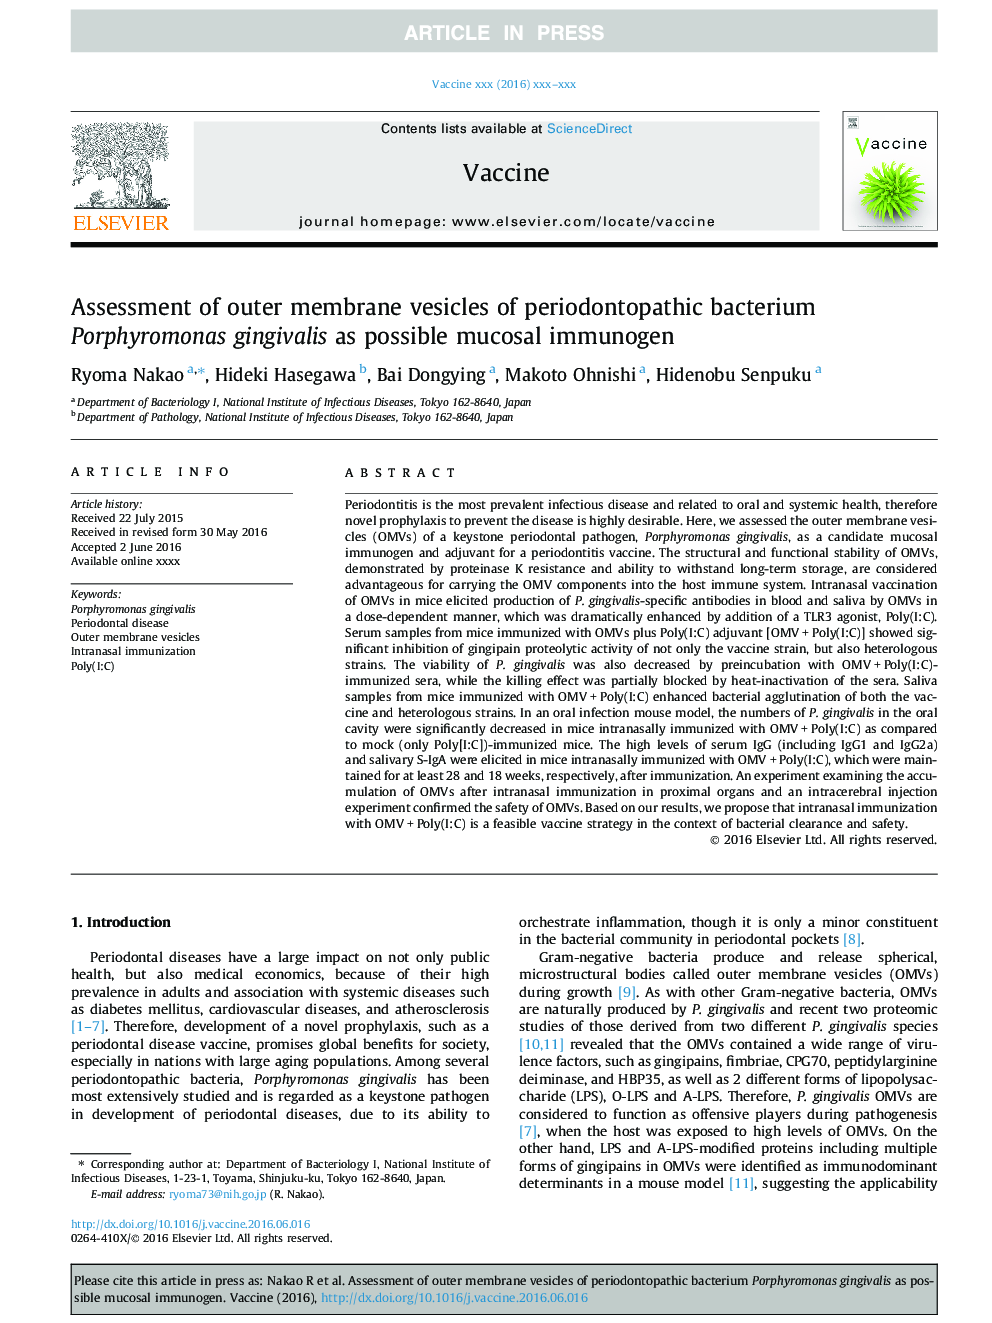 Assessment of outer membrane vesicles of periodontopathic bacterium Porphyromonas gingivalis as possible mucosal immunogen